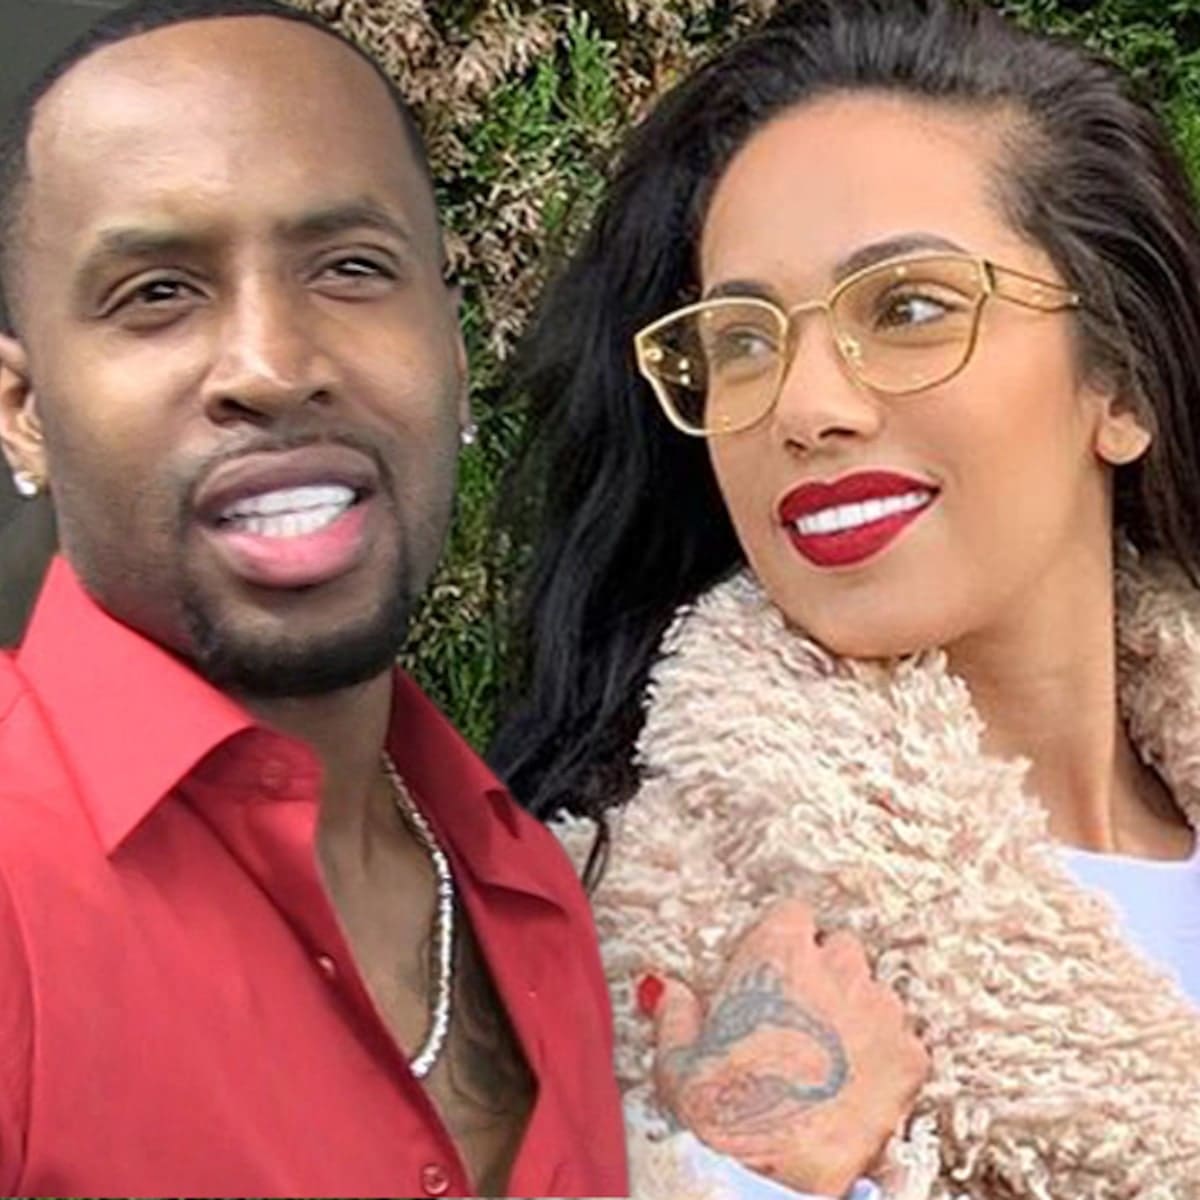 Erica Mena And Safaree Recreate Kim Kardashian And Kanye West's 2013 Met Gala Look And Fans Are In Awe